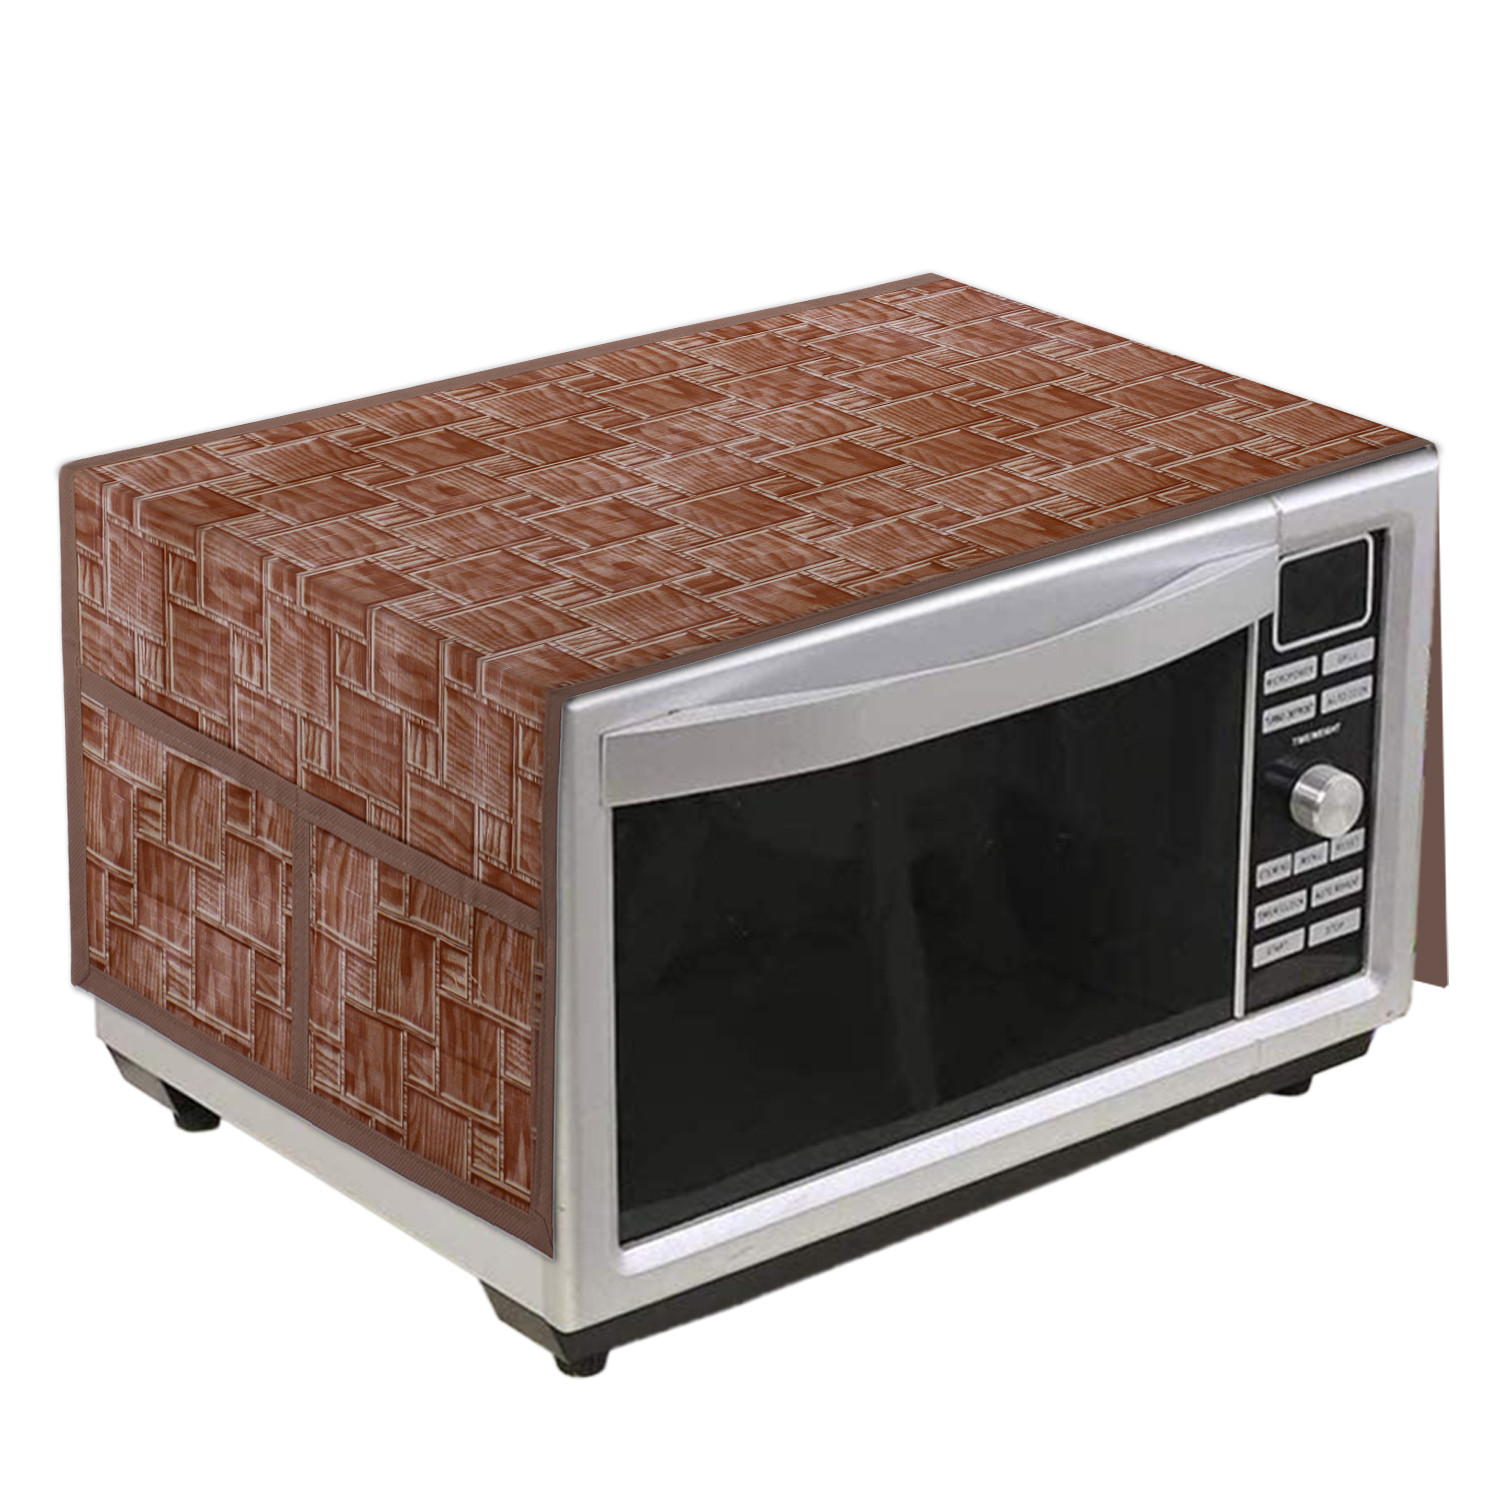 Kuber Industries Wooden Check Printed PVC Decorative Microwave Oven Top Cover With 4 Utility Pockets (Brown)